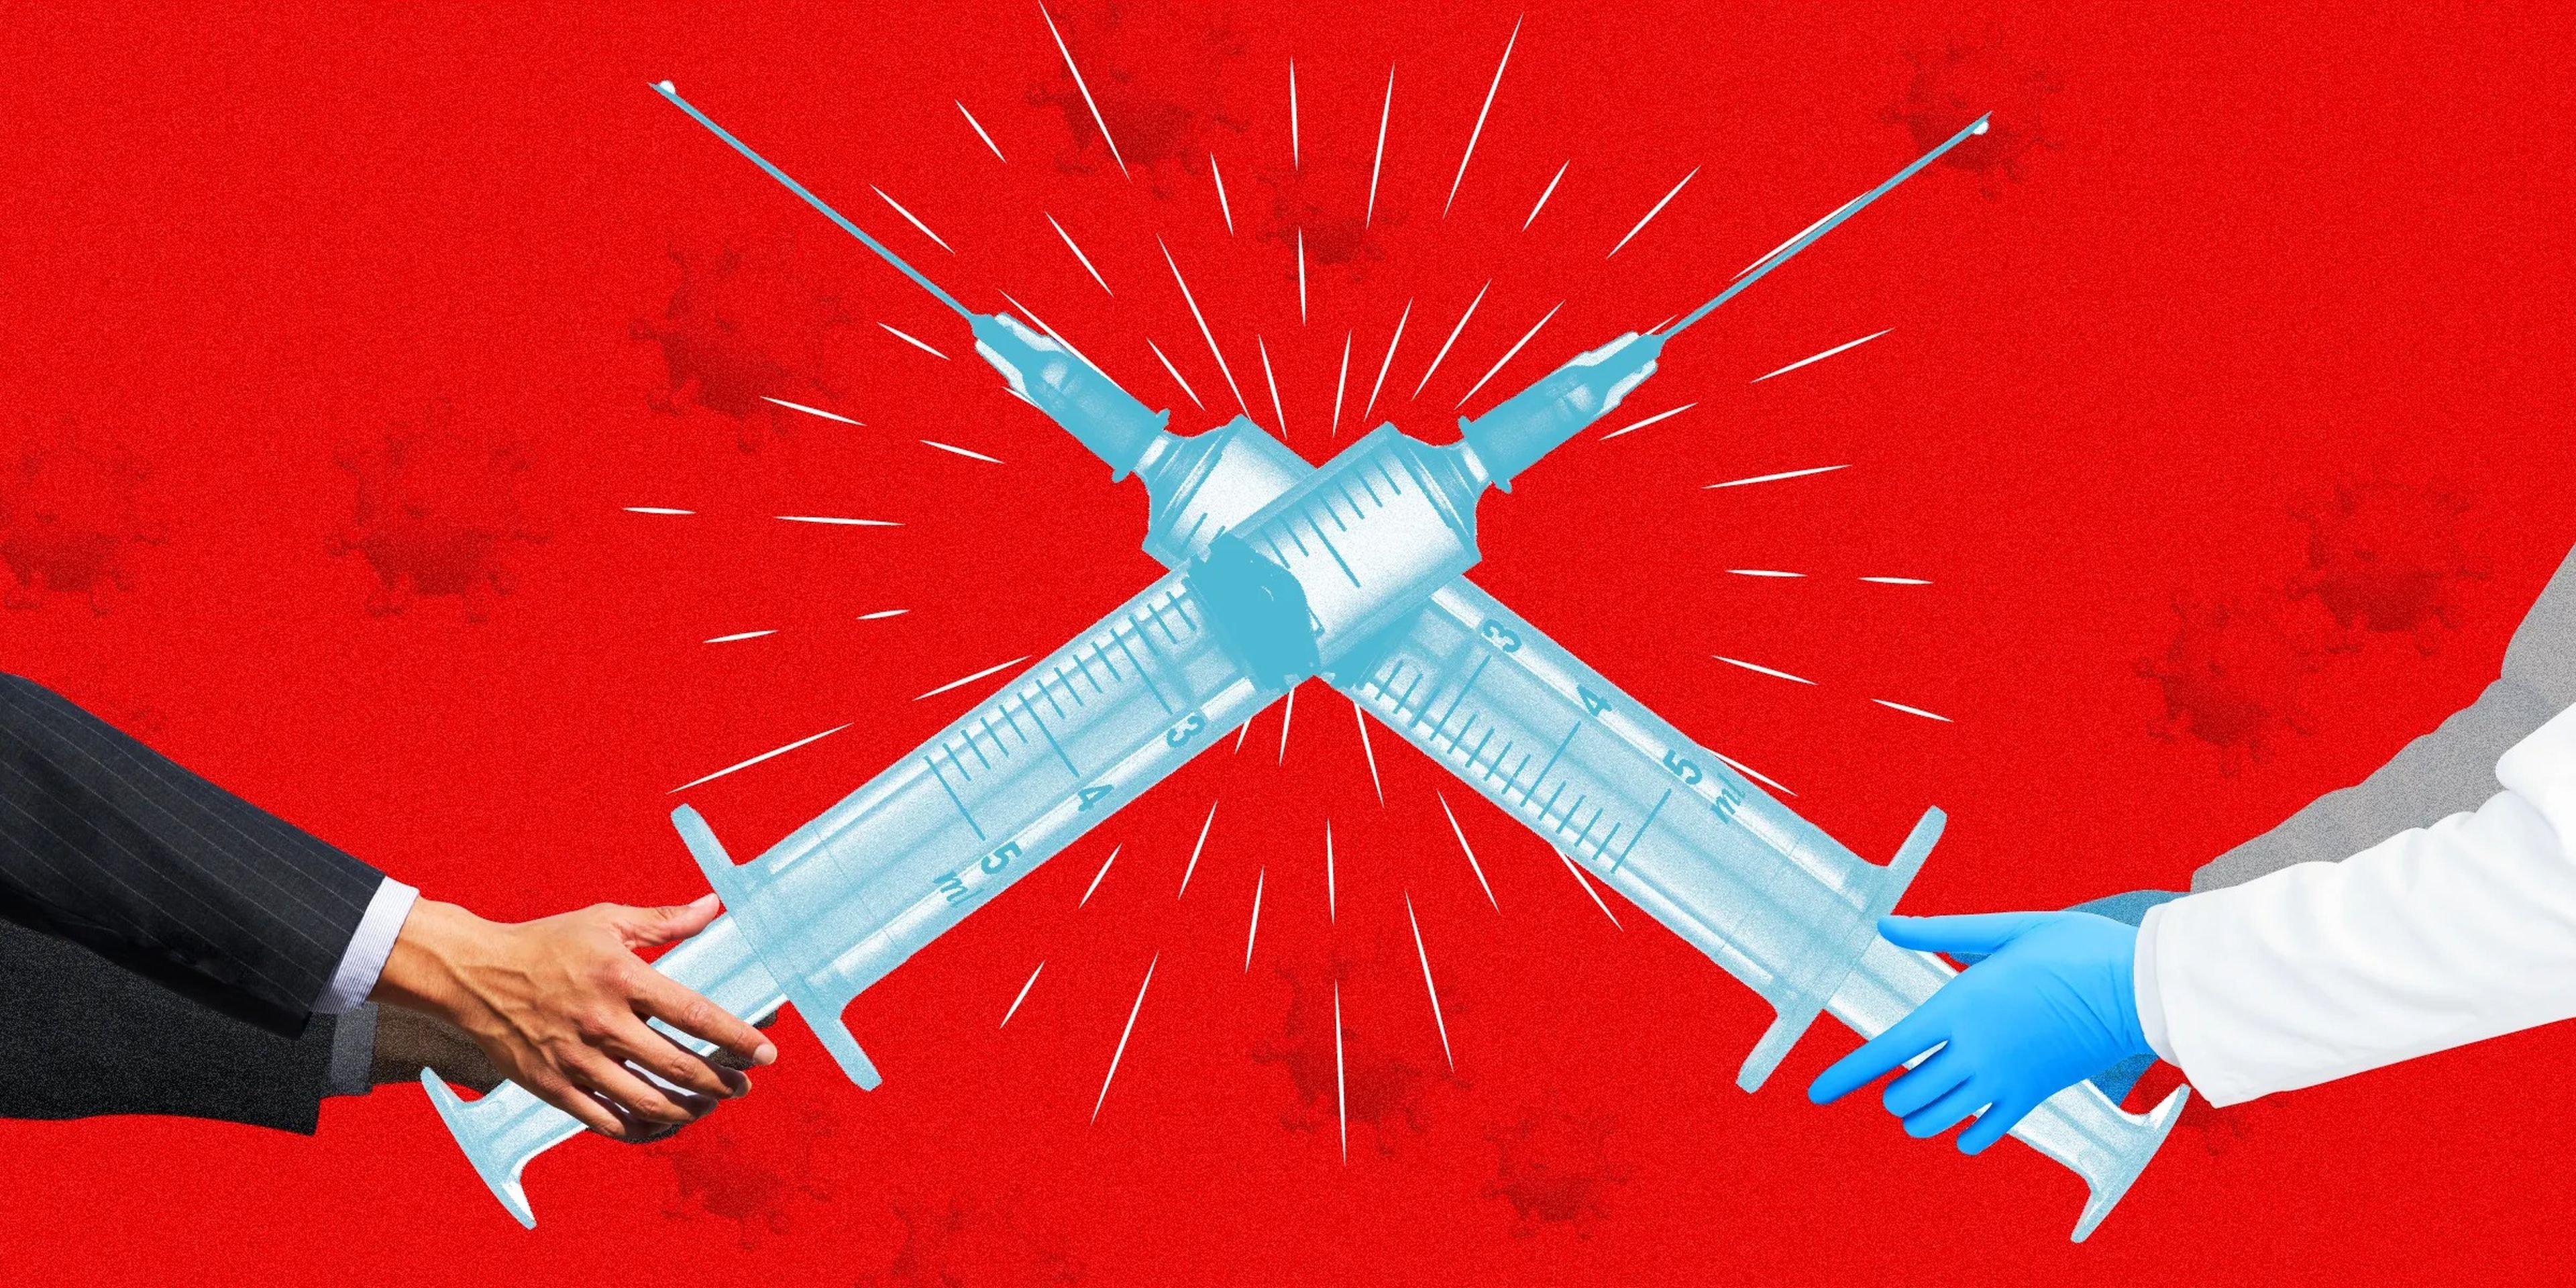 Two oversized vaccine syringes clashing each other like swords, one held by arms of a business person and the other by arms of a doctor, on top of a red background with coronaviruses